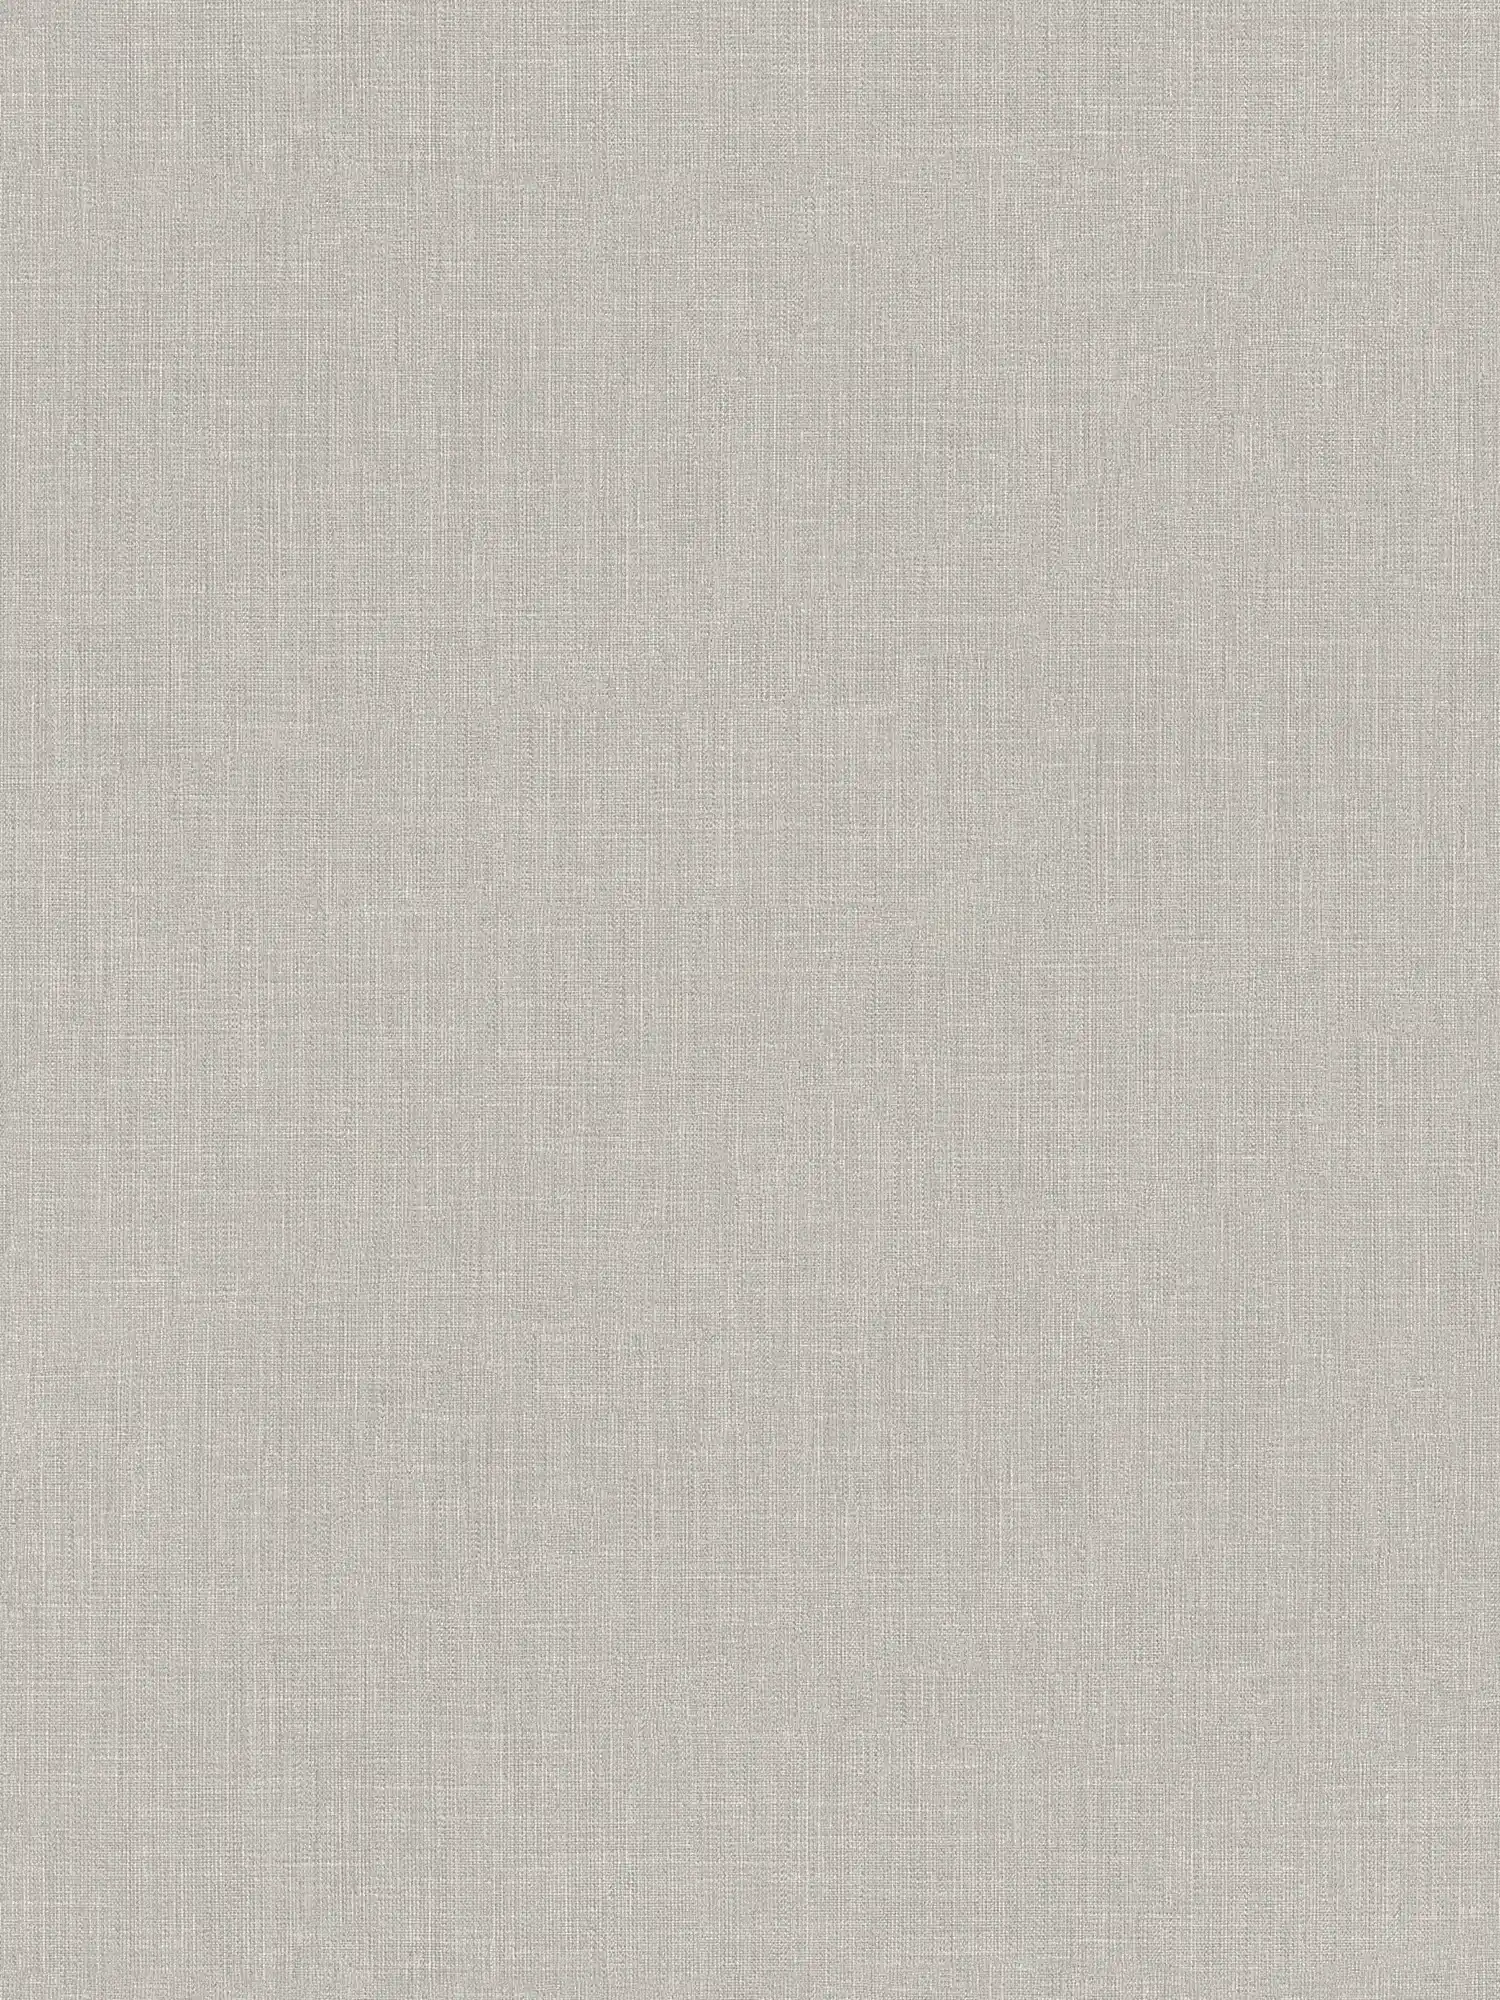 Non-woven wallpaper grey with textile look & texture pattern
